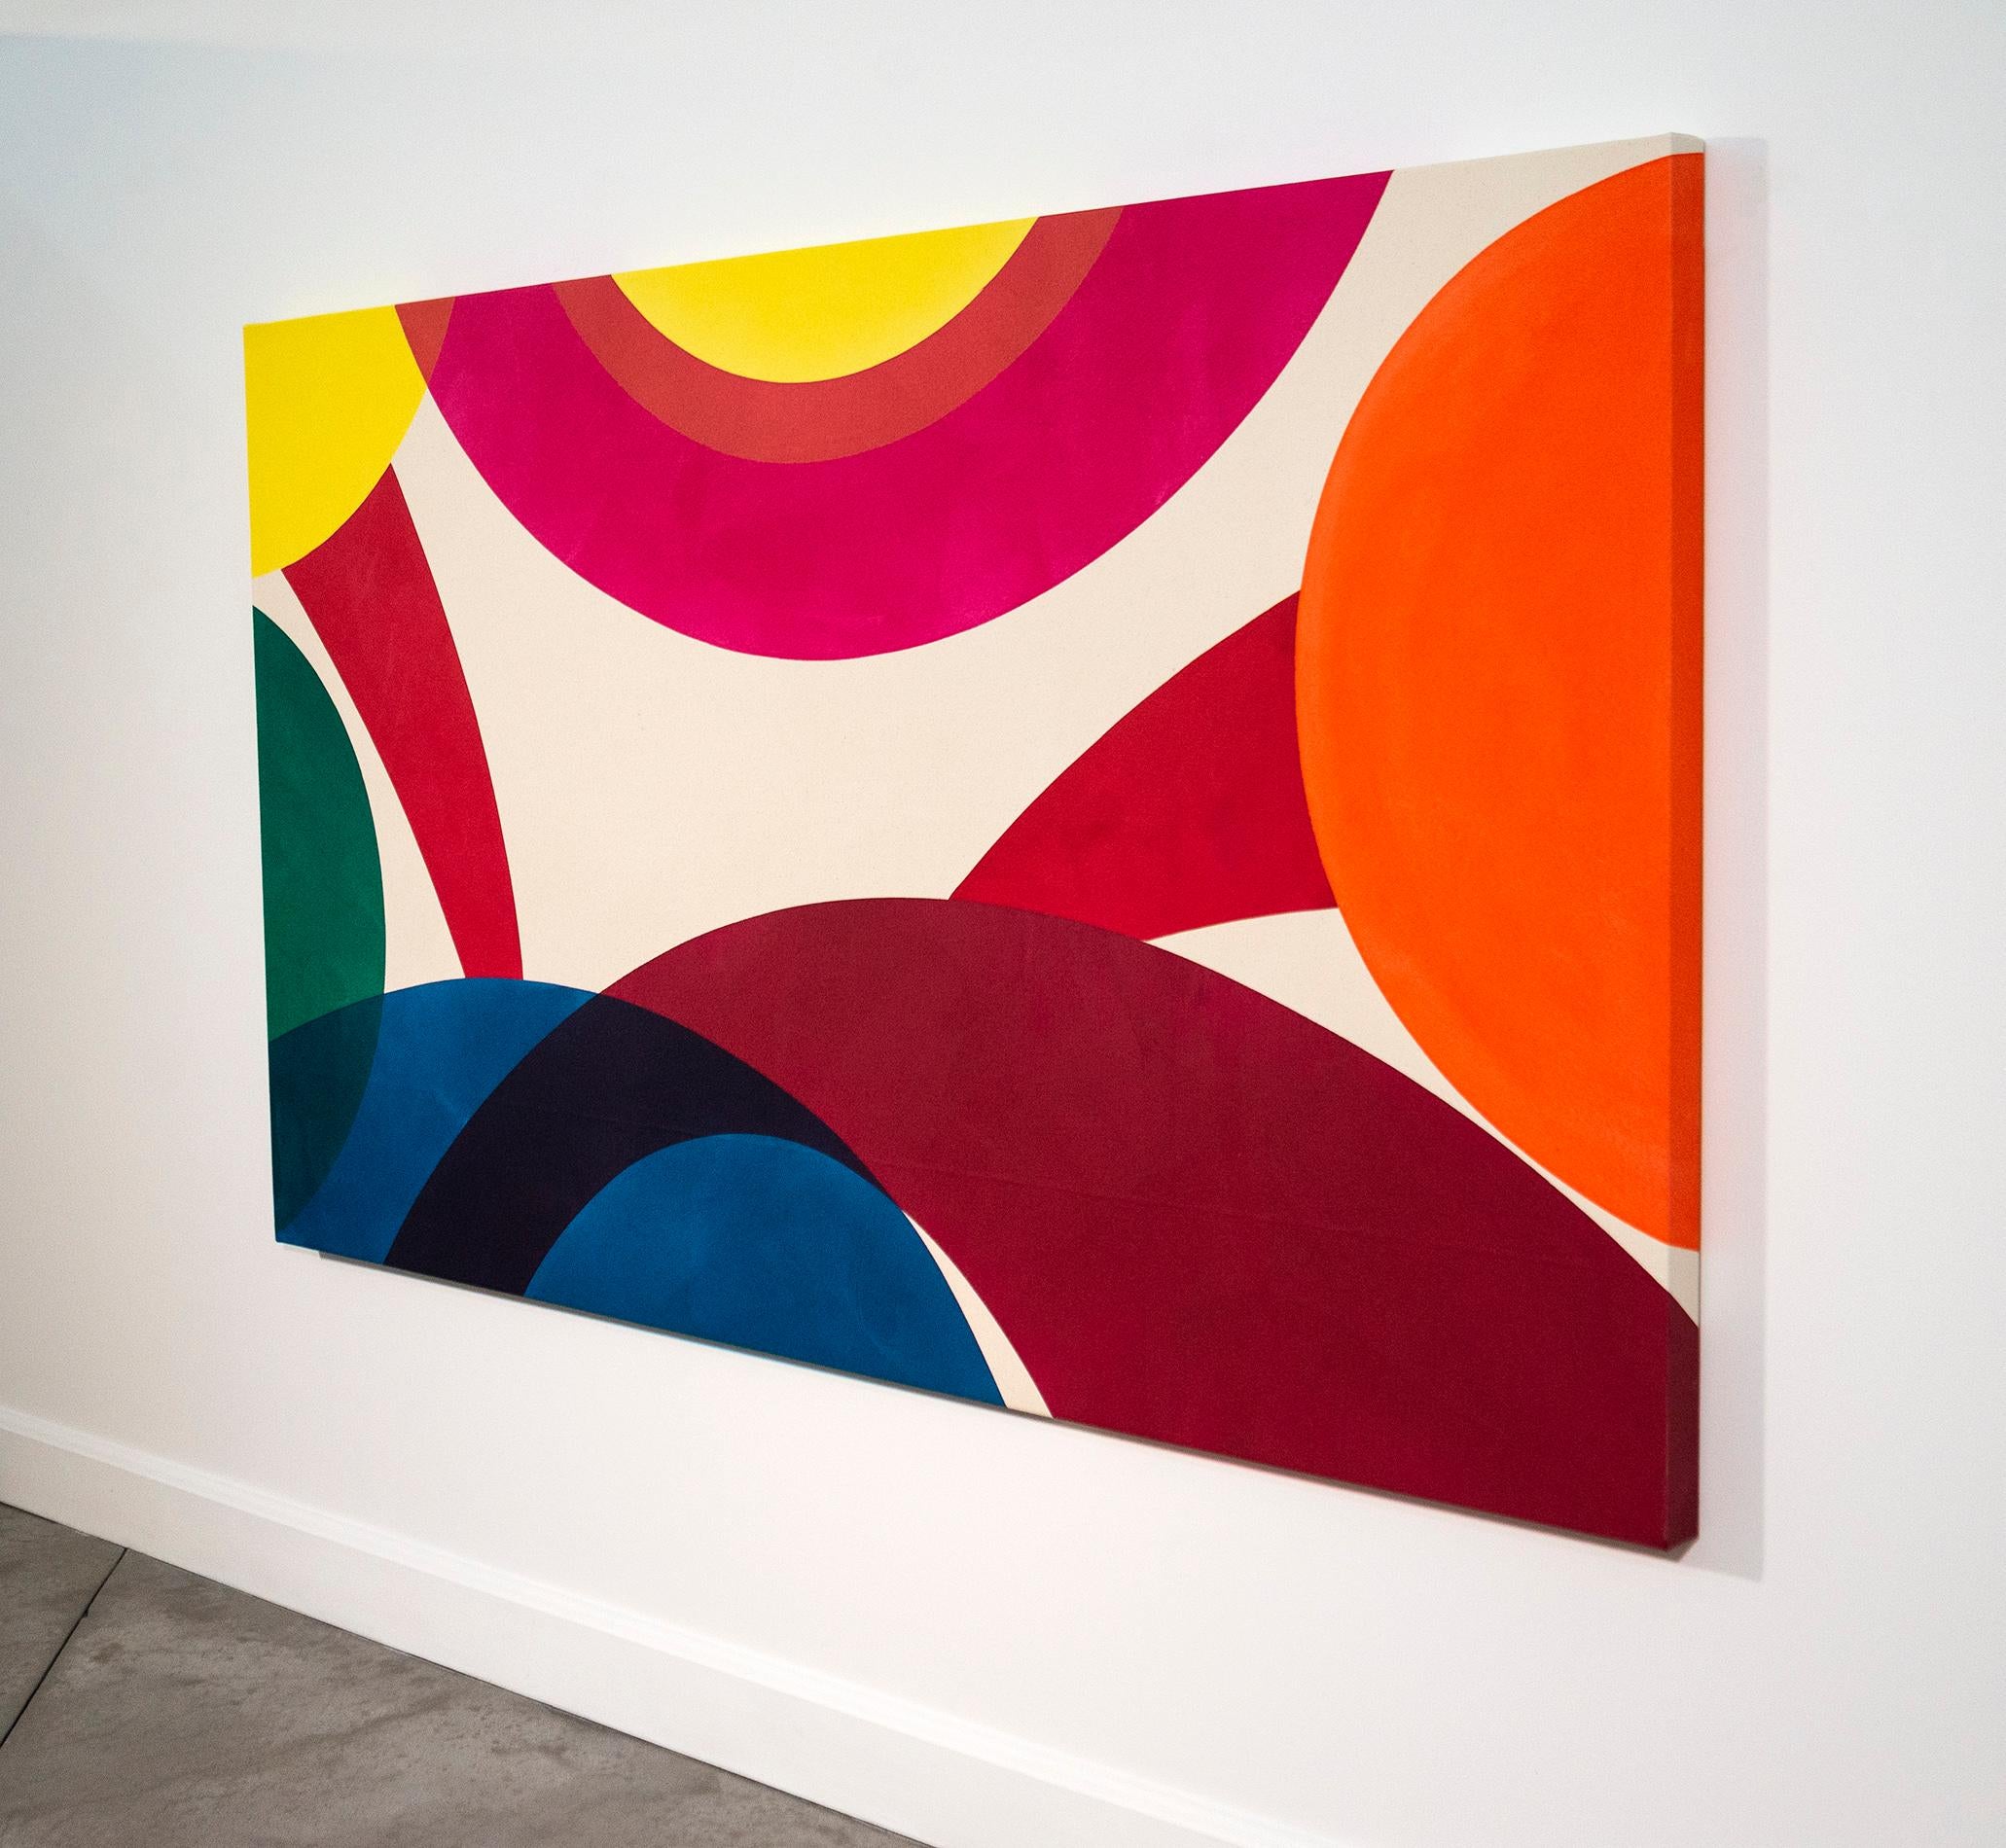 Fresh and modern, Aron Hill embraces colour and bold, simple shapes to create dynamic paintings. Curves, lines and half-circles in hot pink, bright yellow, deep blue, green, red and orange pop against the white canvas. Inspired by the form and